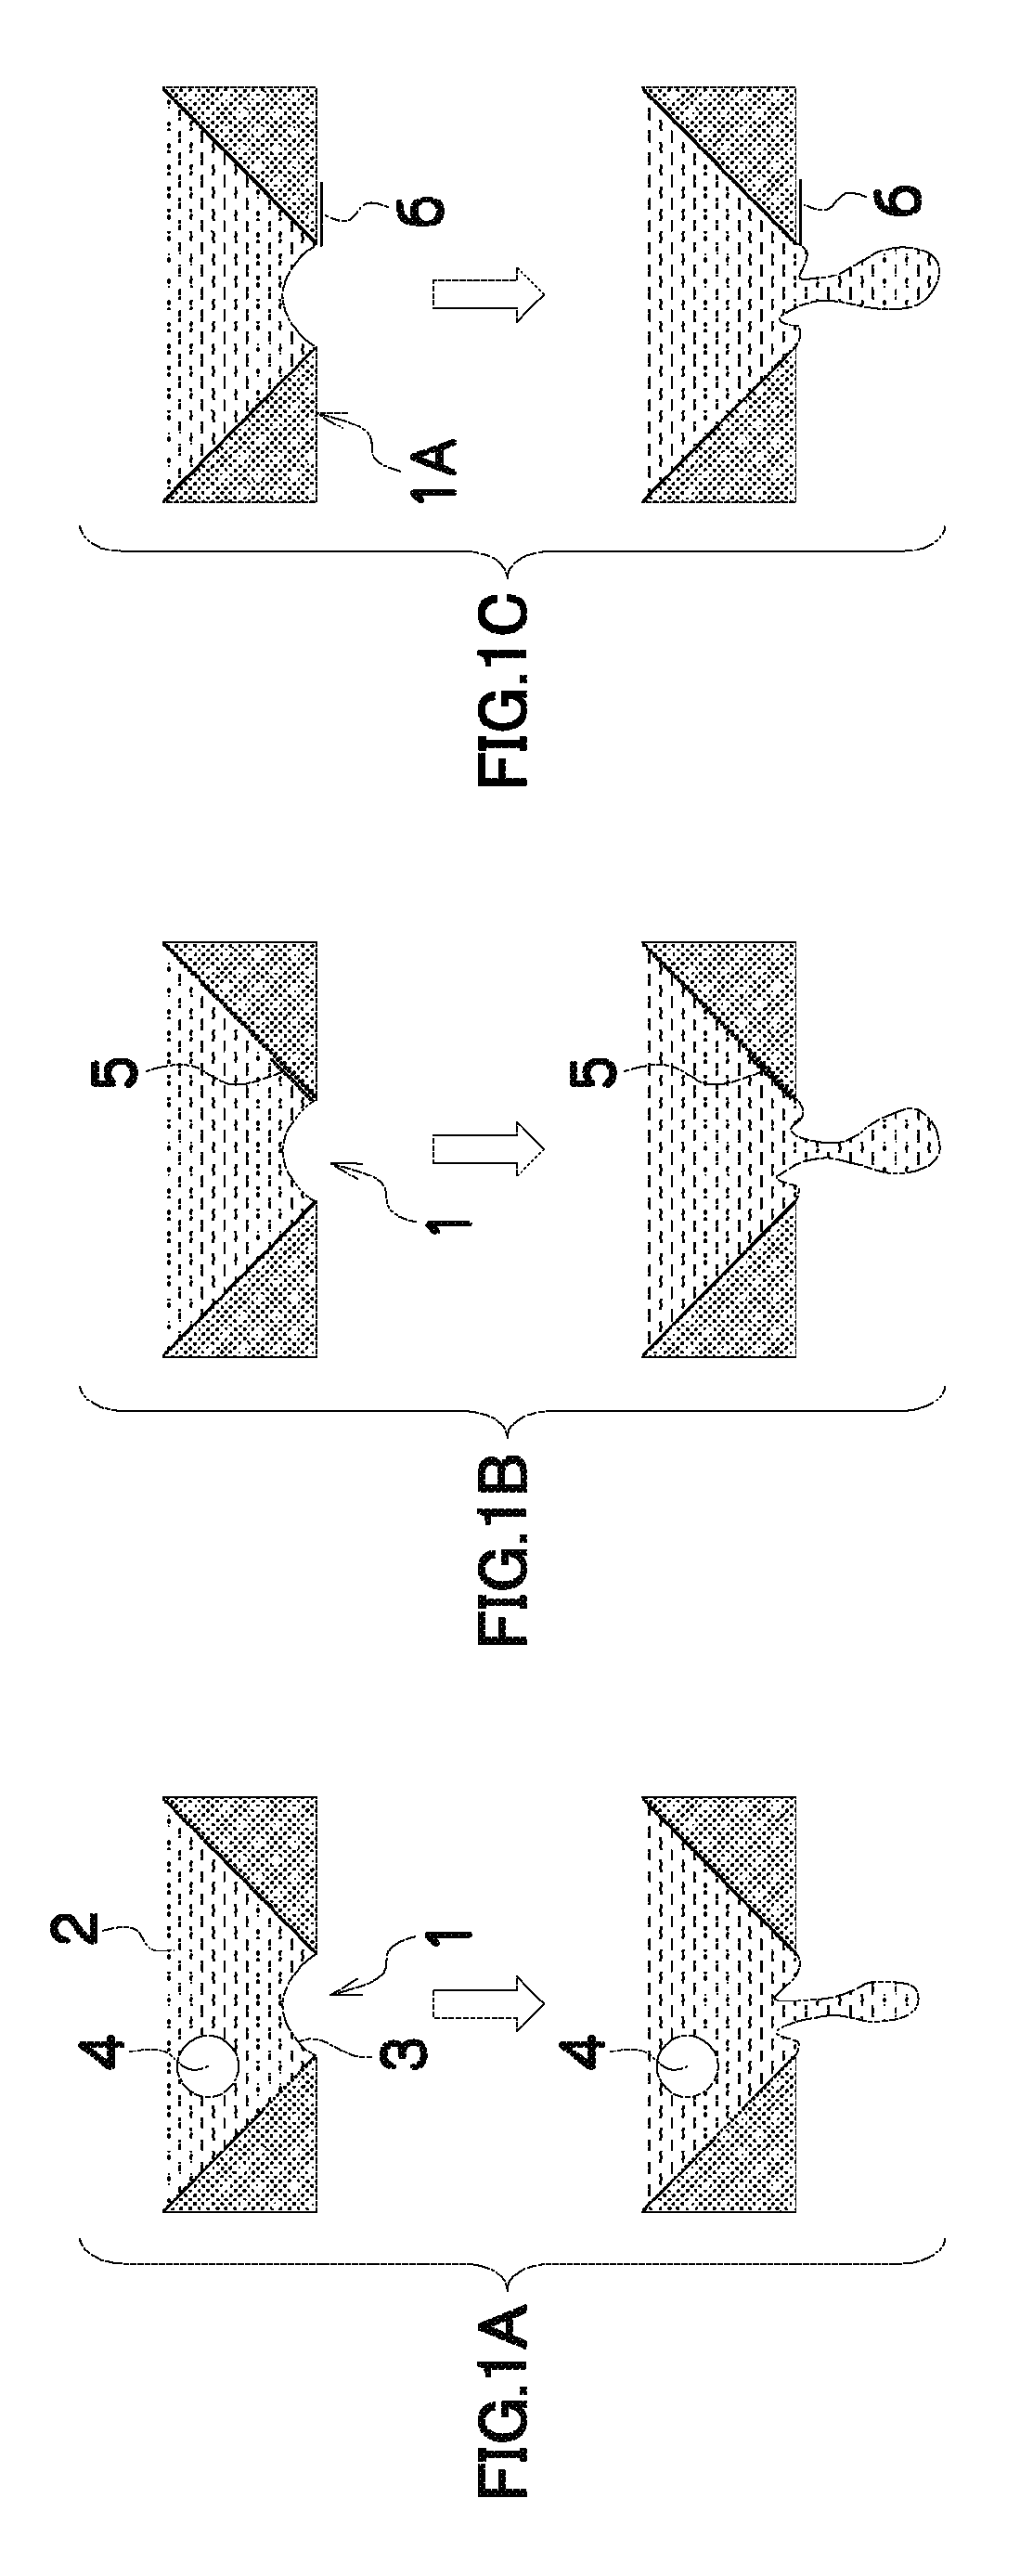 Inkjet recording apparatus and method, and abnormal nozzle detection method